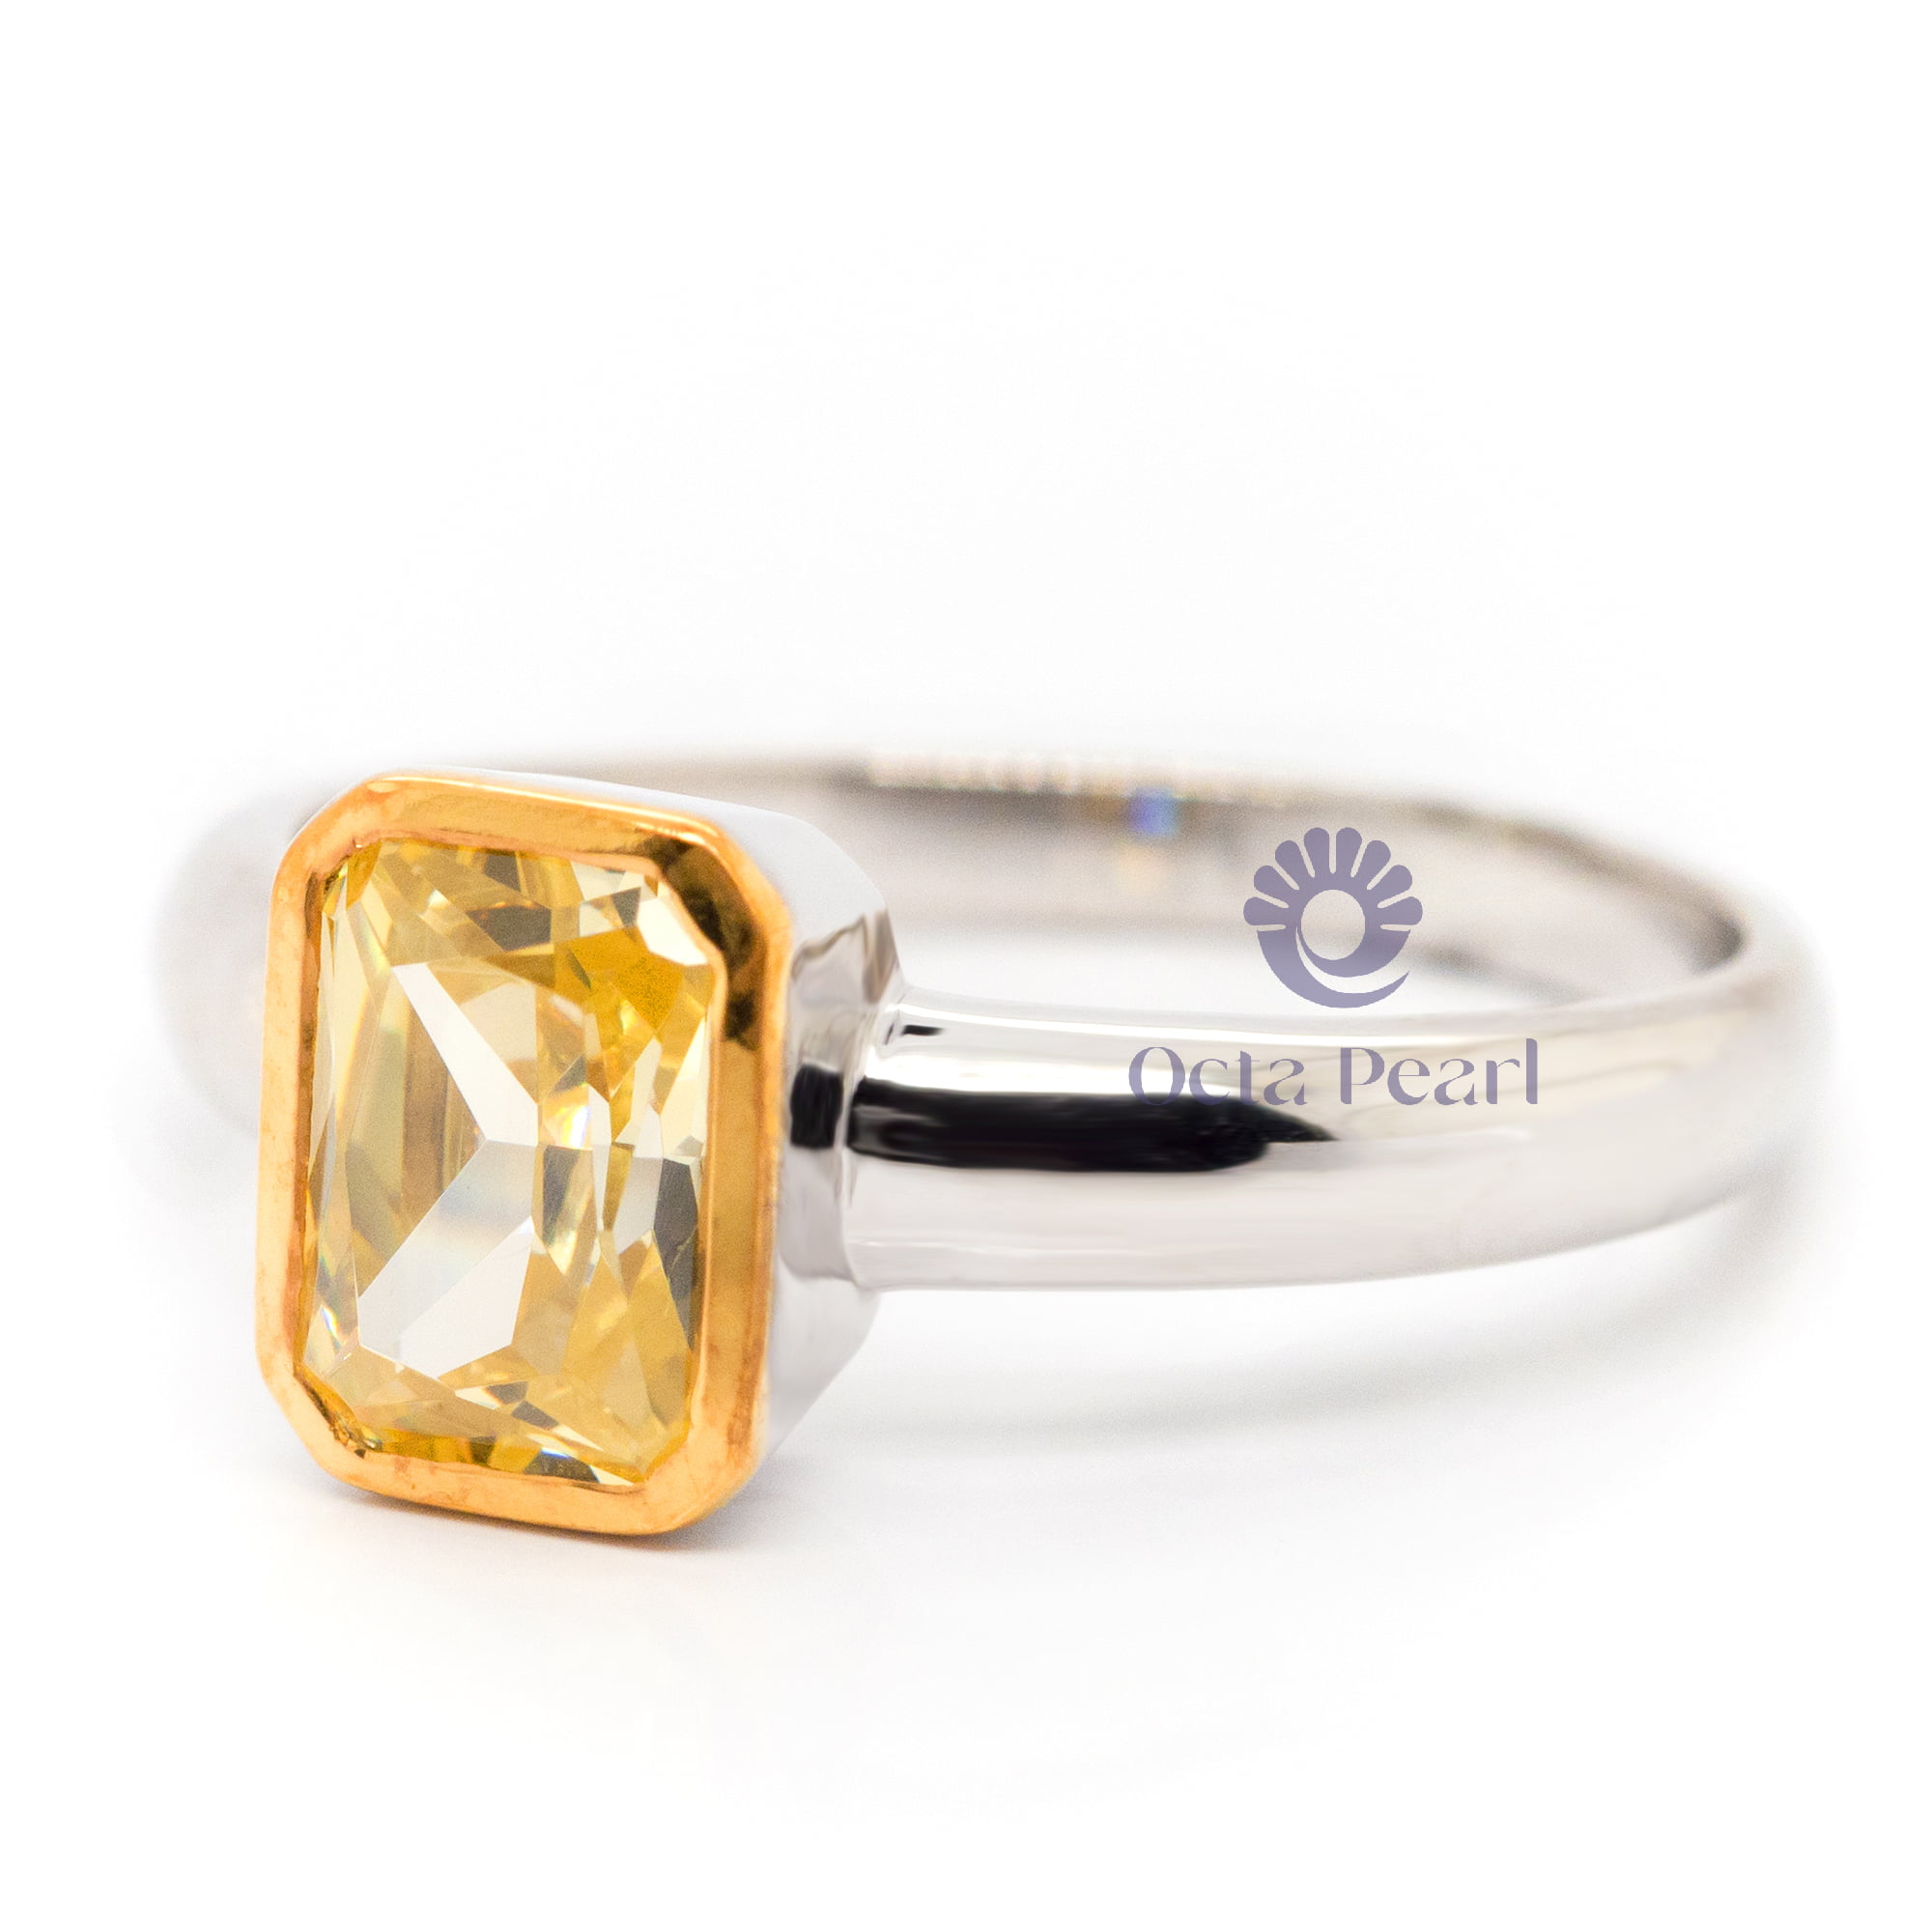 Gorgeous Radiant Cut Canary Yellow CZ Stone Bezel Set Solitaire Classic Engagement Ring ( 4/2 TCW)